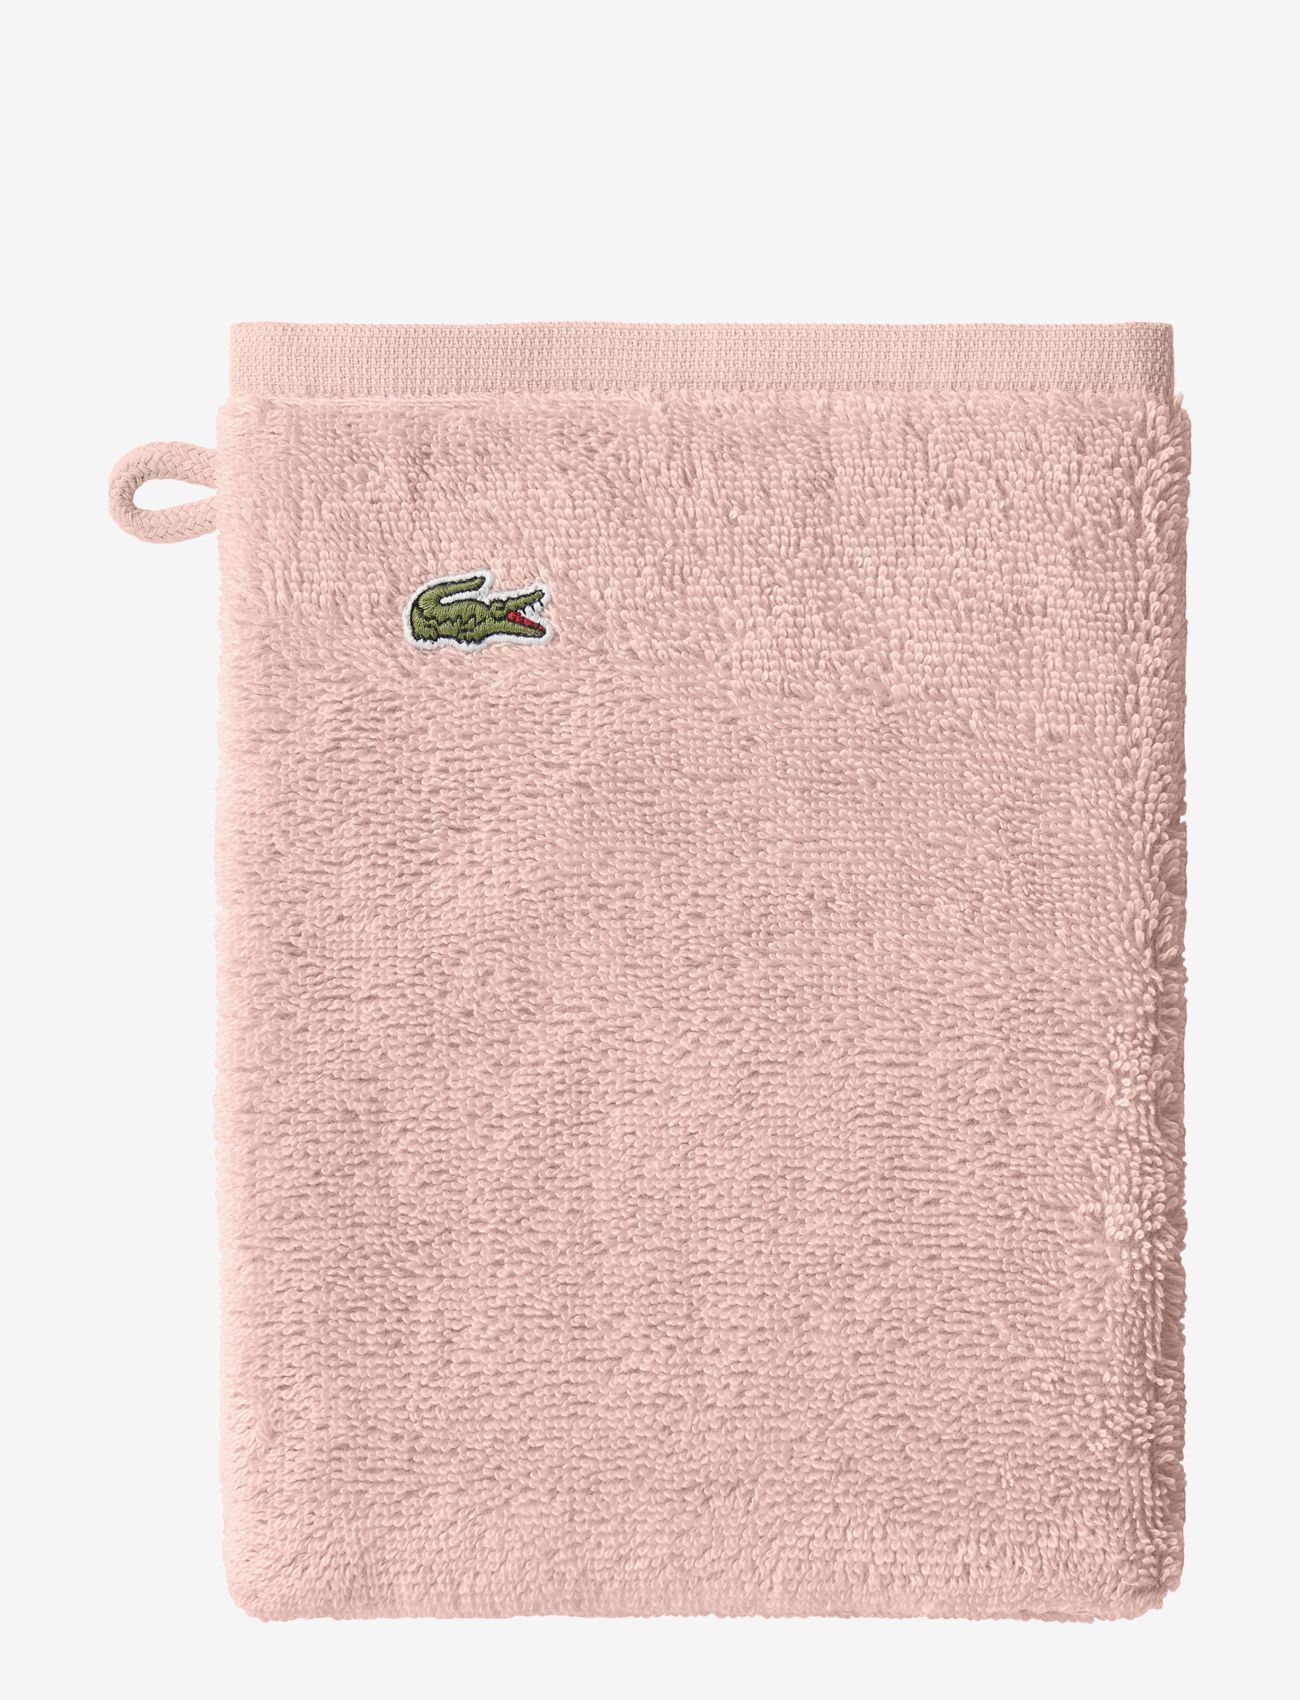 Lacoste Home - LLECROCO Mitt - face towels - rosepal - 0